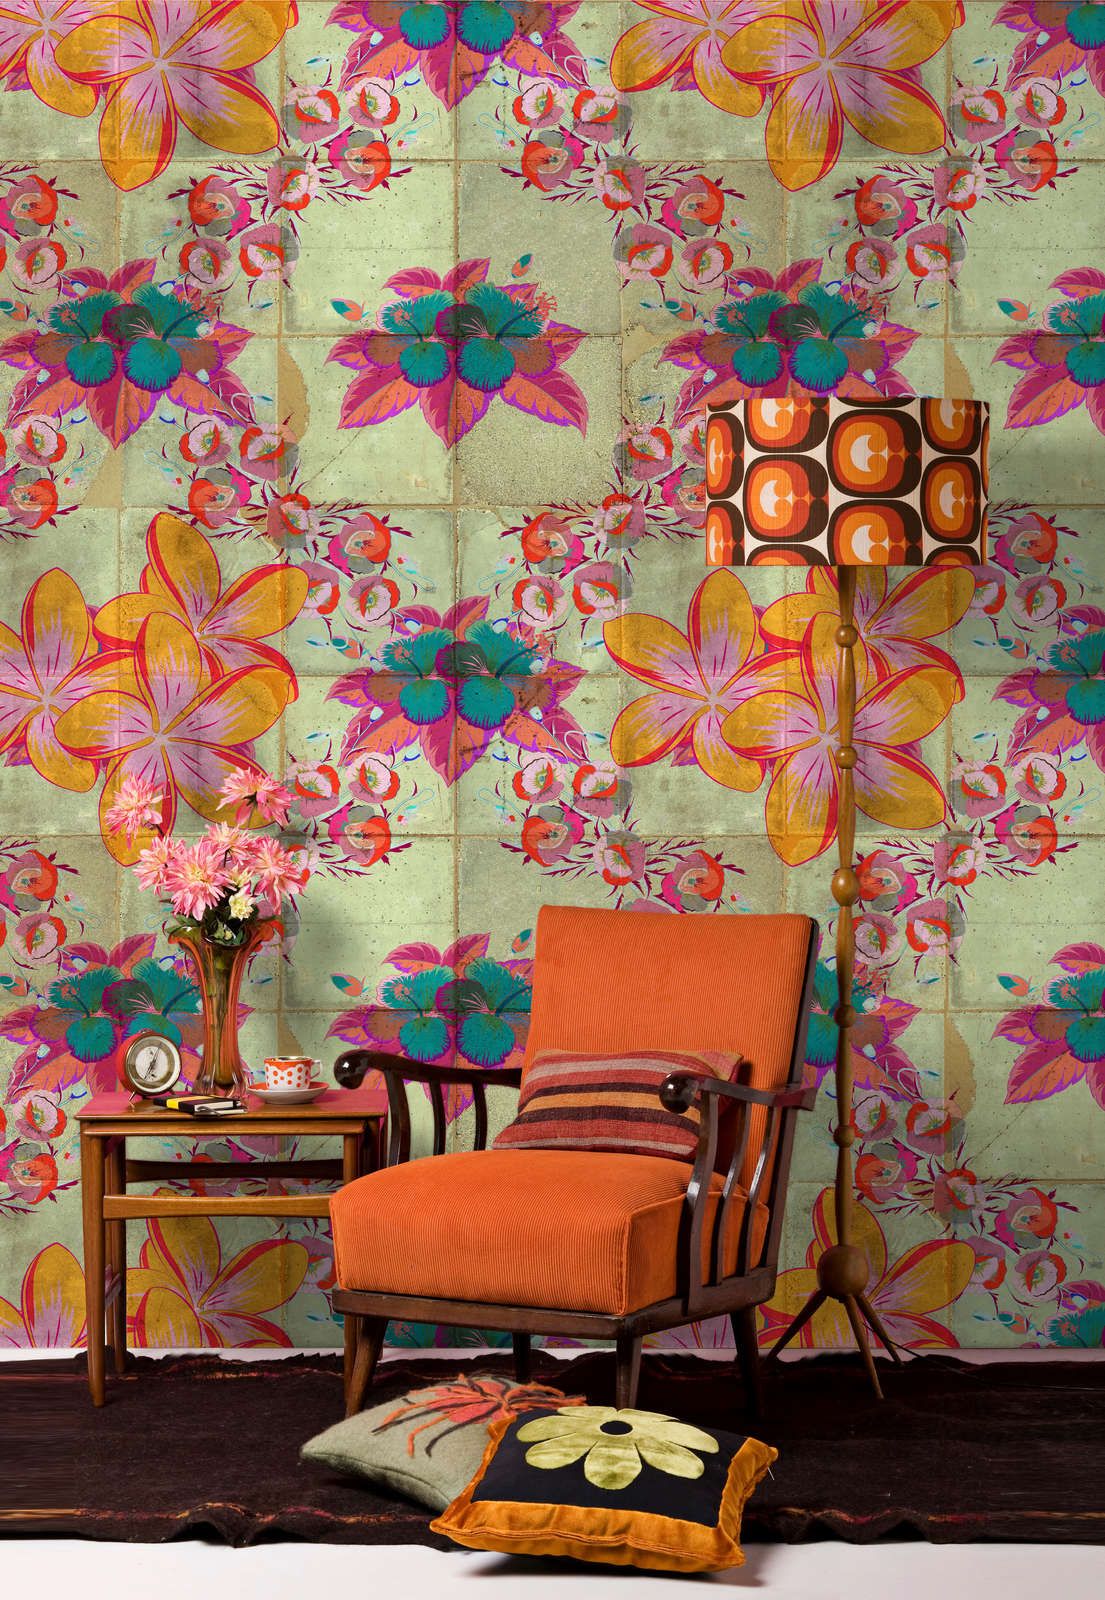             Photo wallpaper »jolie« - Floral design with kaleidoscope effect on concrete tile structure - Smooth, slightly pearlescent non-woven fabric
        